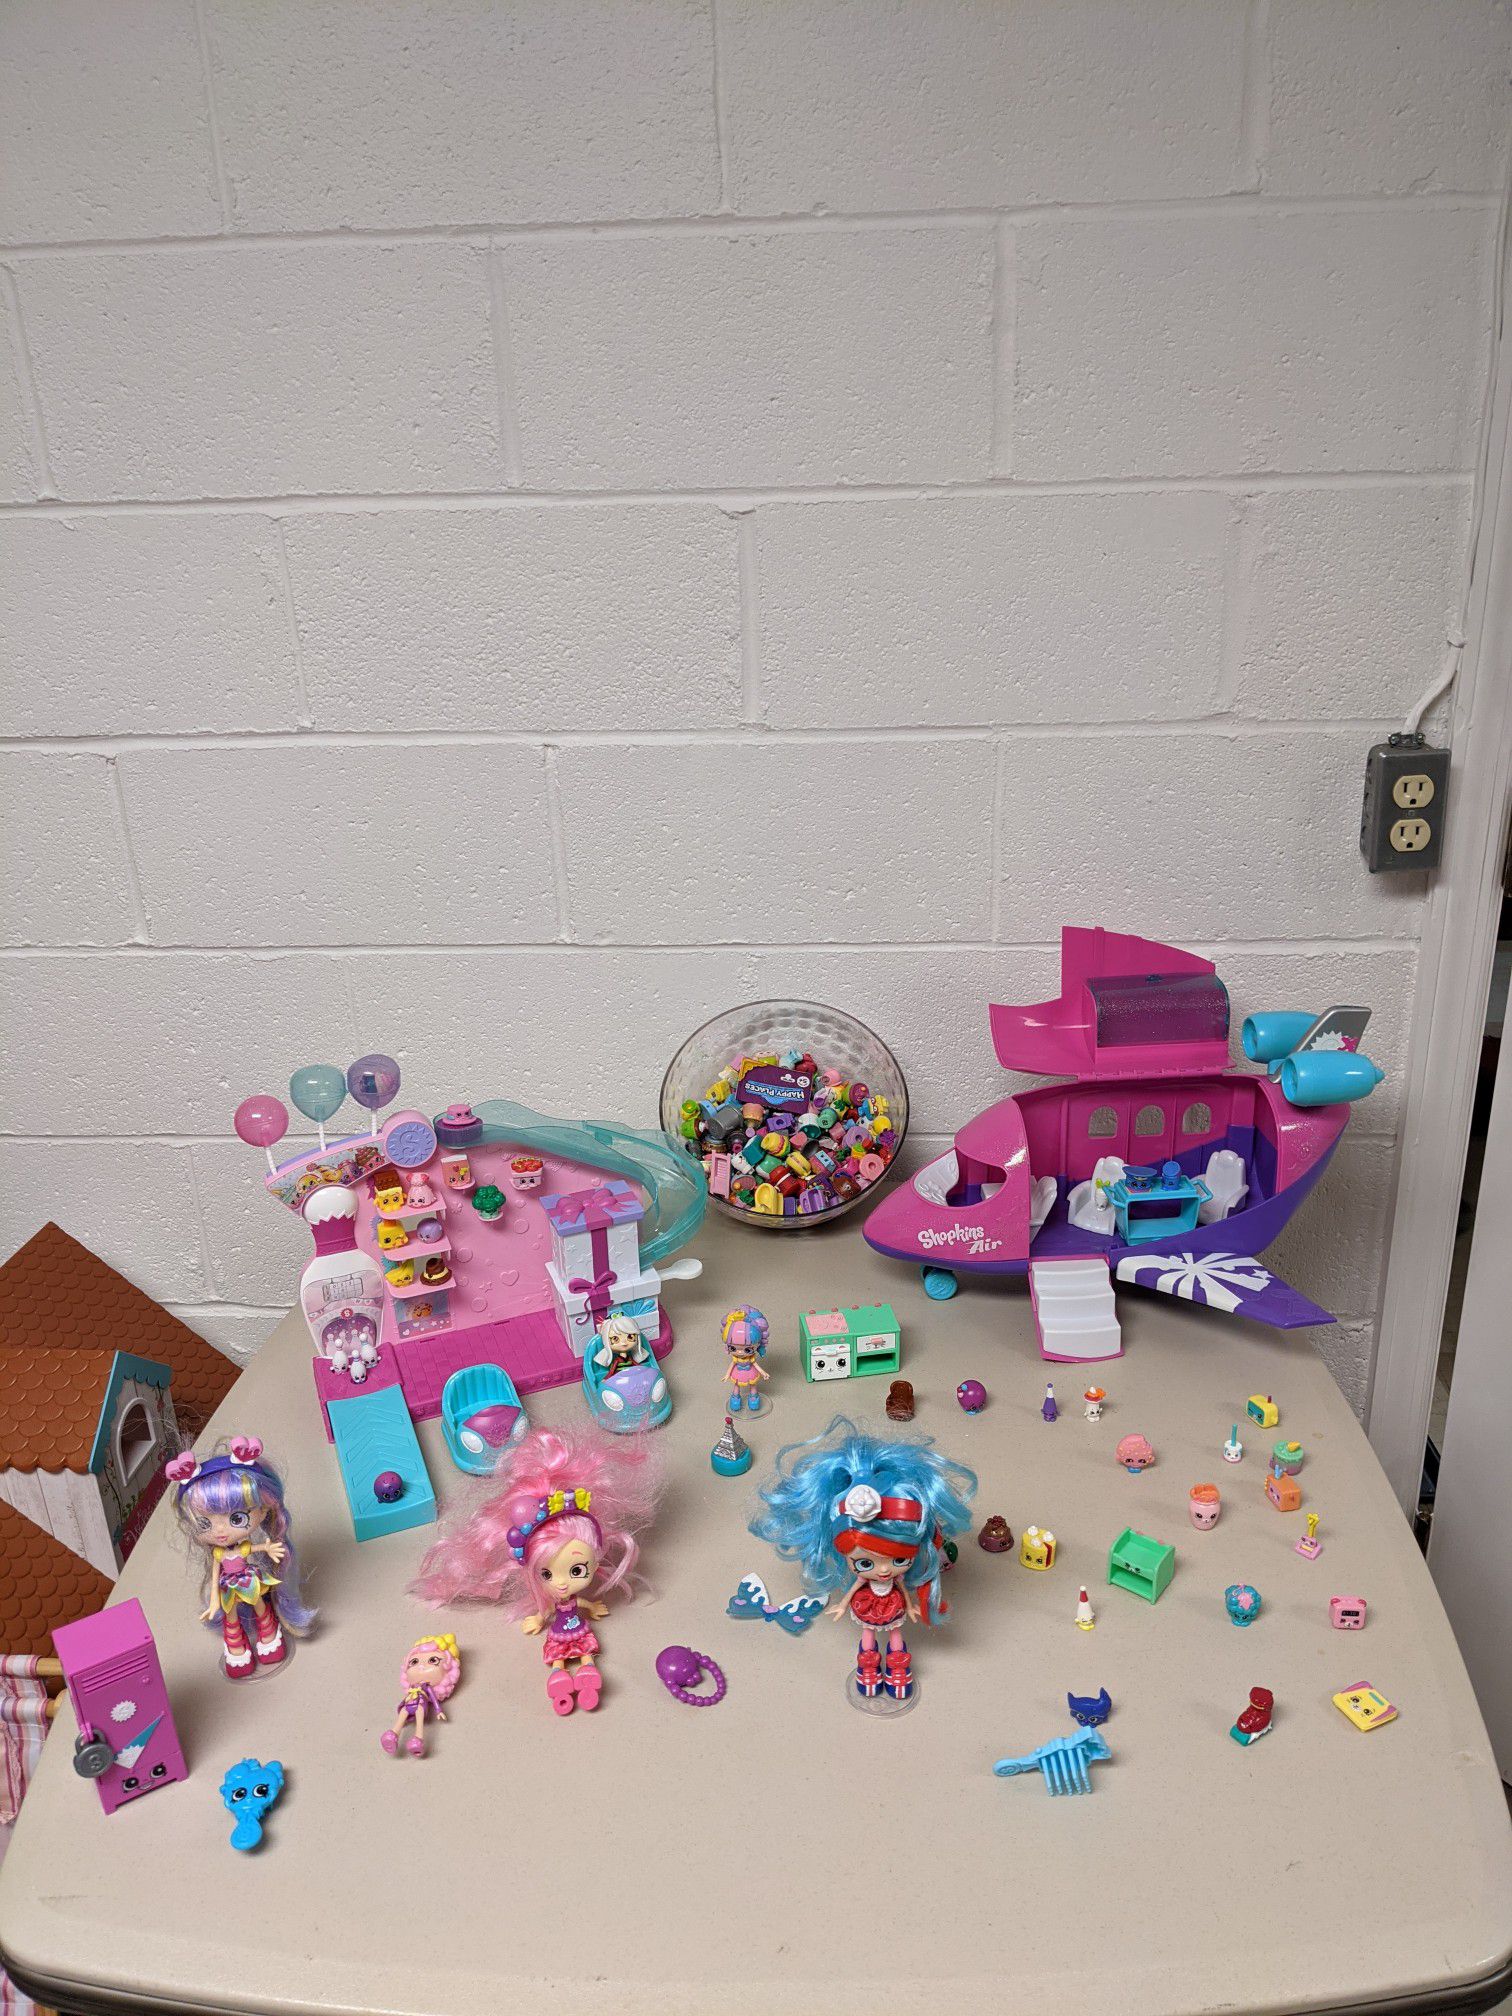 Shopkins airplane and bowling alley and shopkins